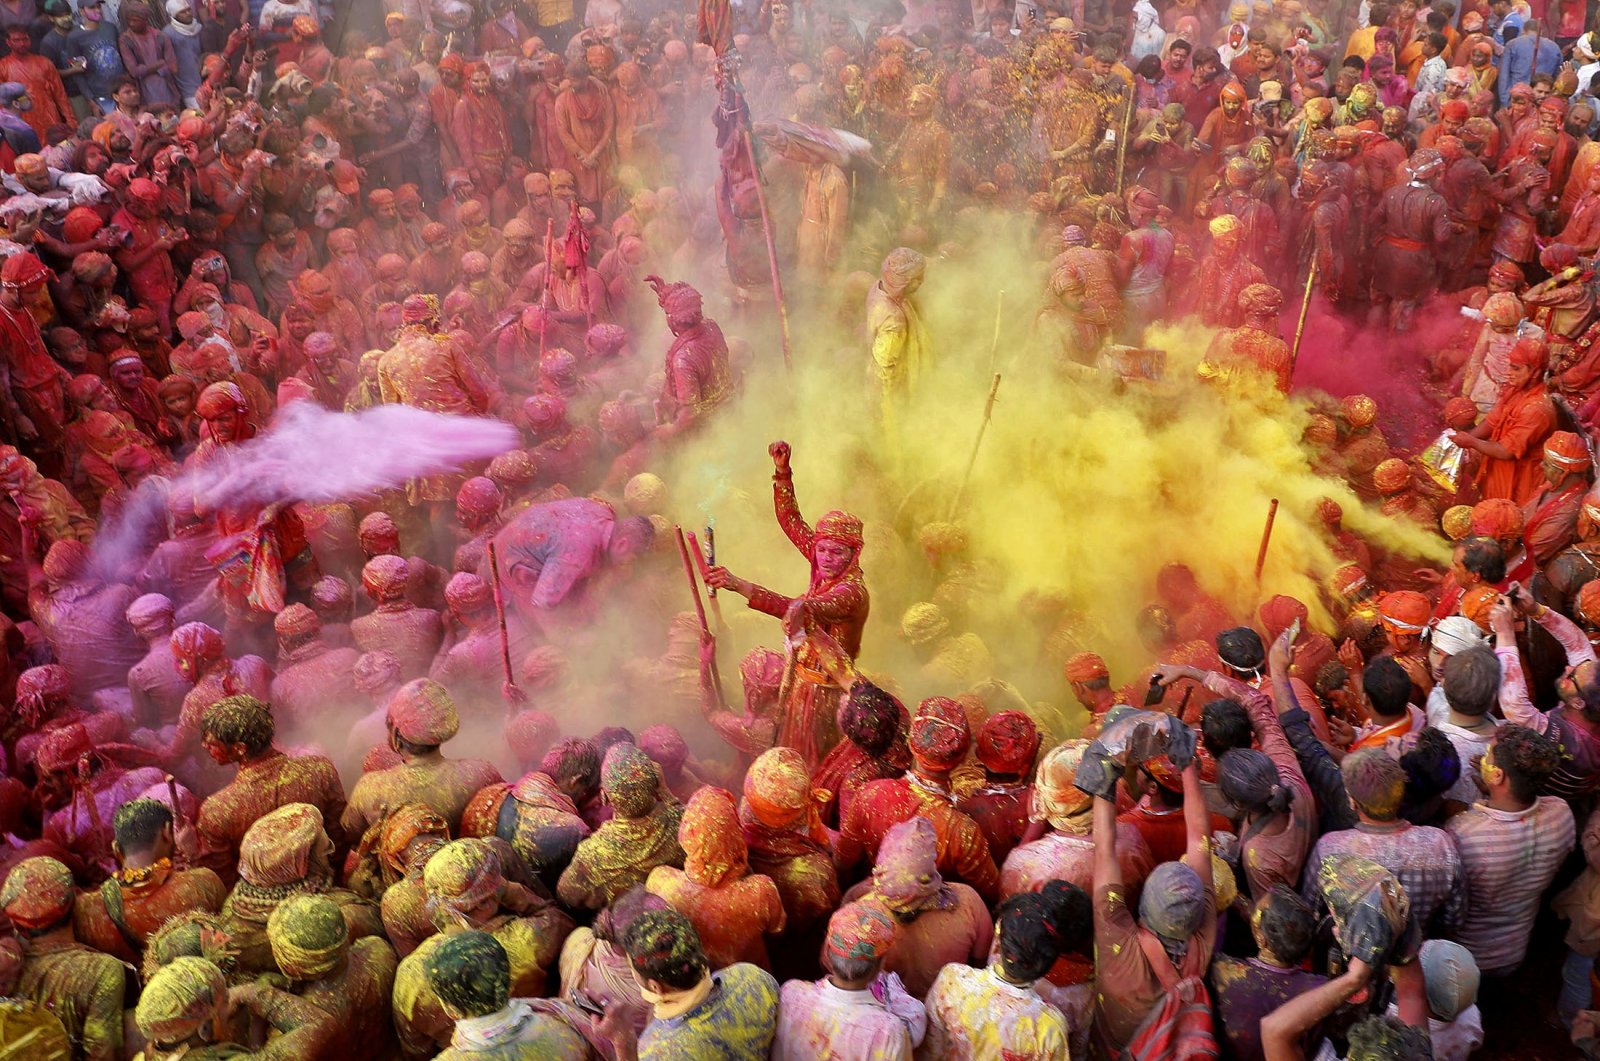 Indians gather for Holi celebrations as COVID-19 cases surge | Daily Sabah